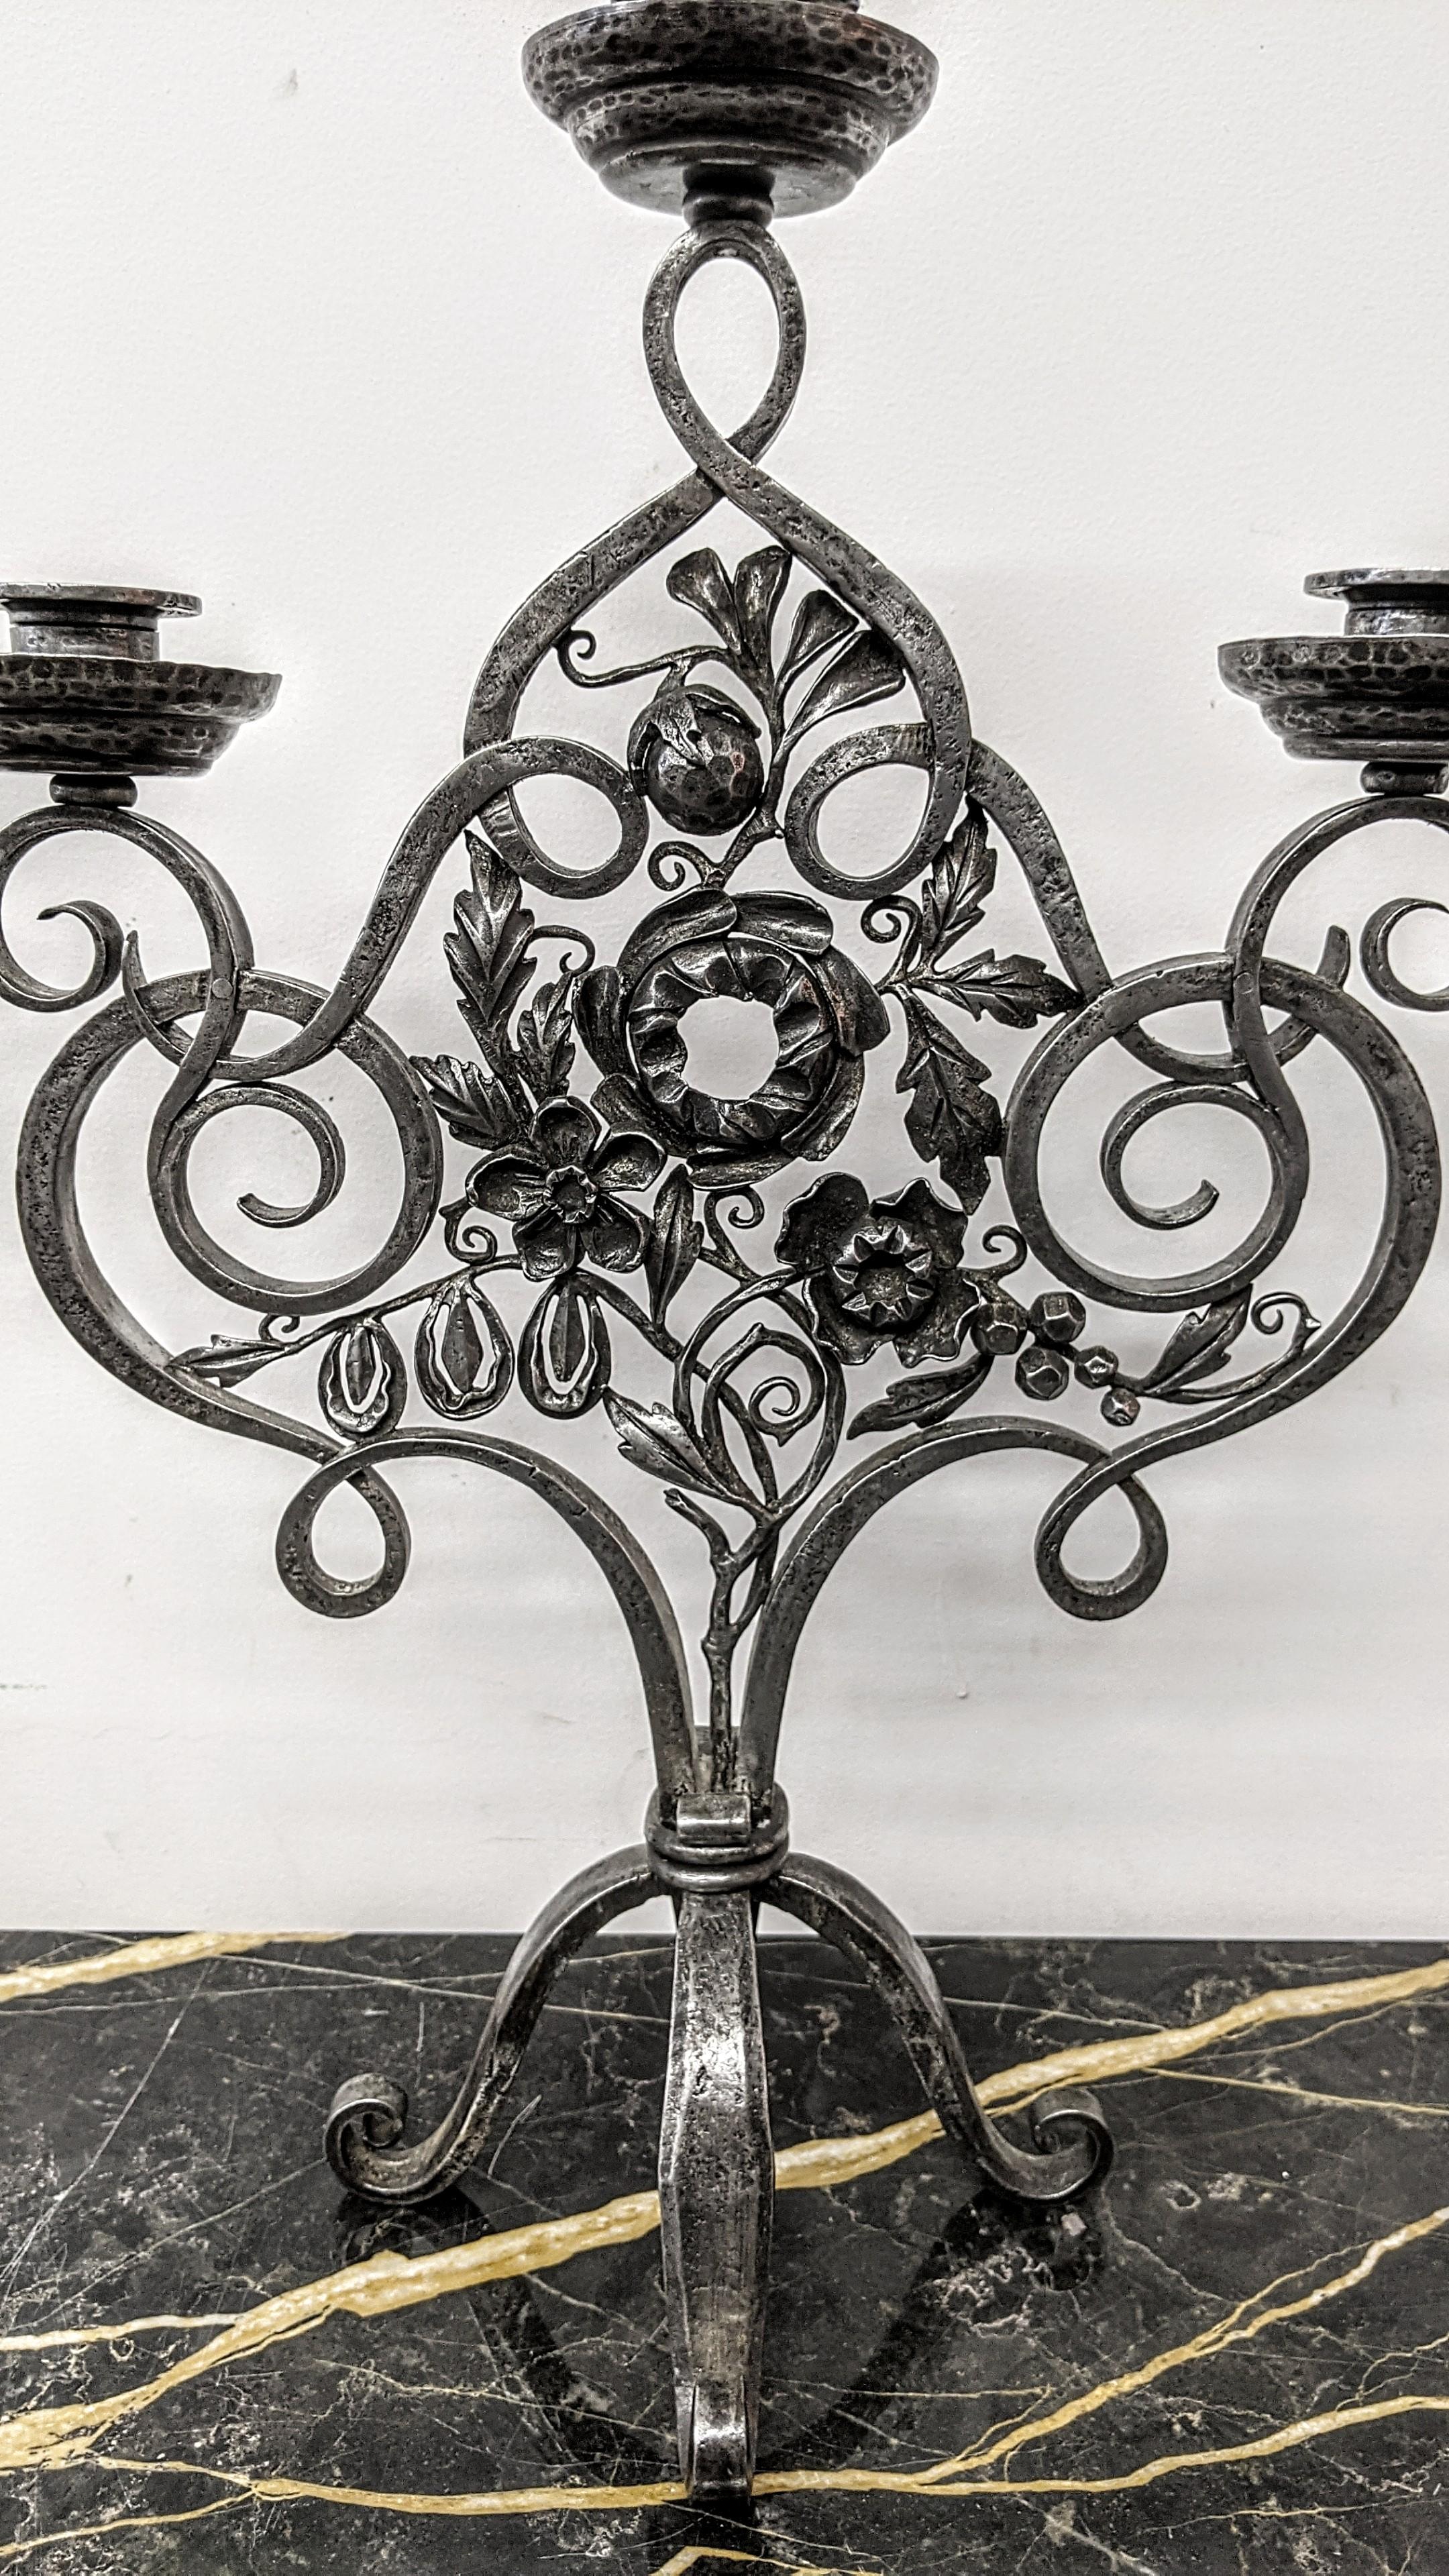 A stunning pair of French Art Deco hand forged wrought iron Candle Sticks by Edgar Brandt in great condition. Distinctively designed with extraordinary details in superb condition, circa 1920's. Dimensions: Height: 19.5 in. Width: 14 in. Depth: 8